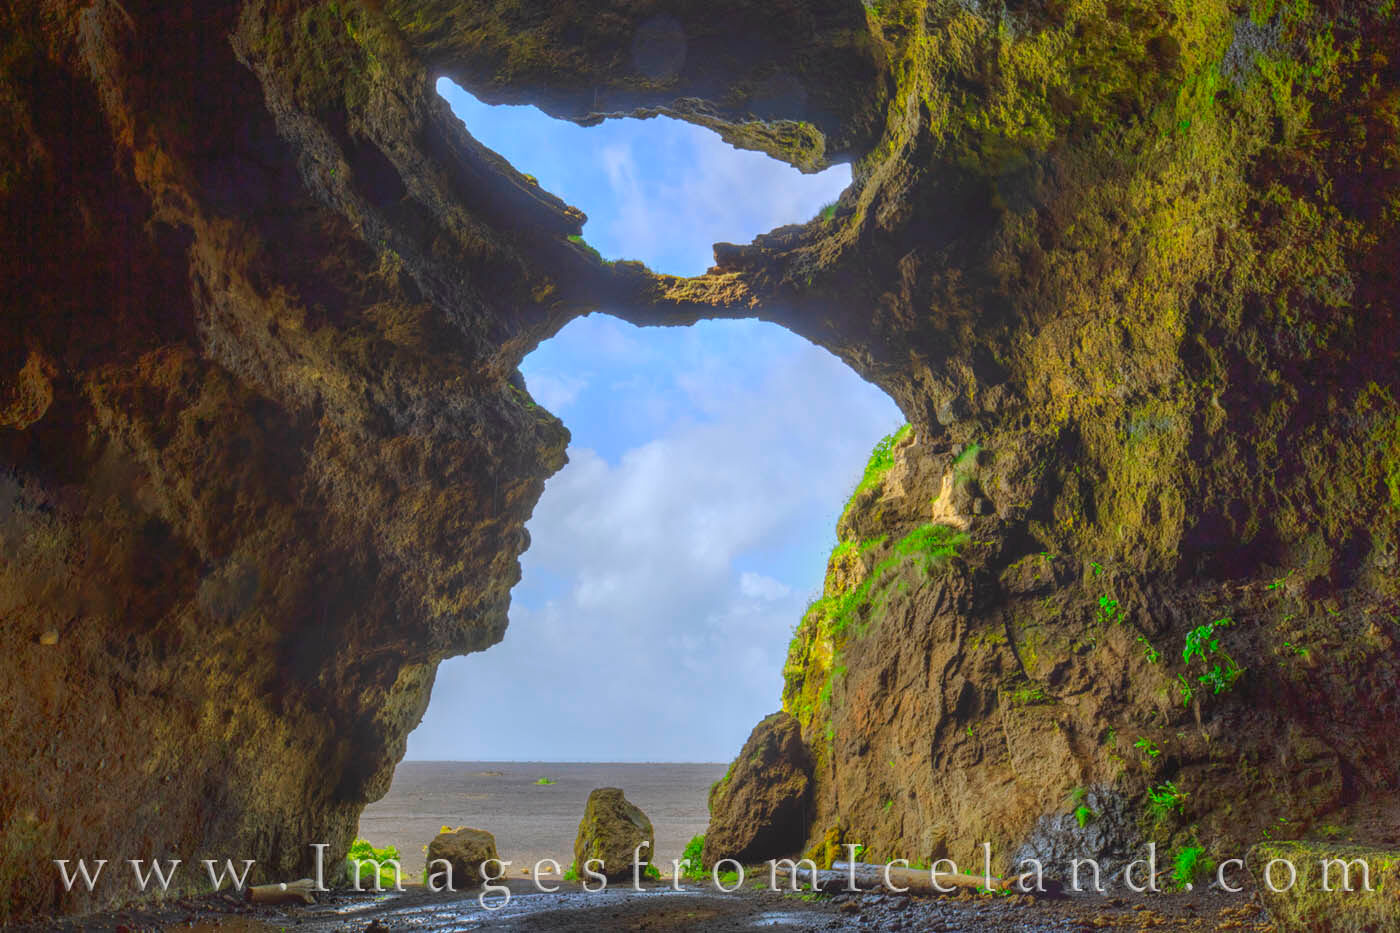 The “Yoda Cave” sits near a beach just south of Vik. This location appeared in “Rogue One” and is slowly becoming more...